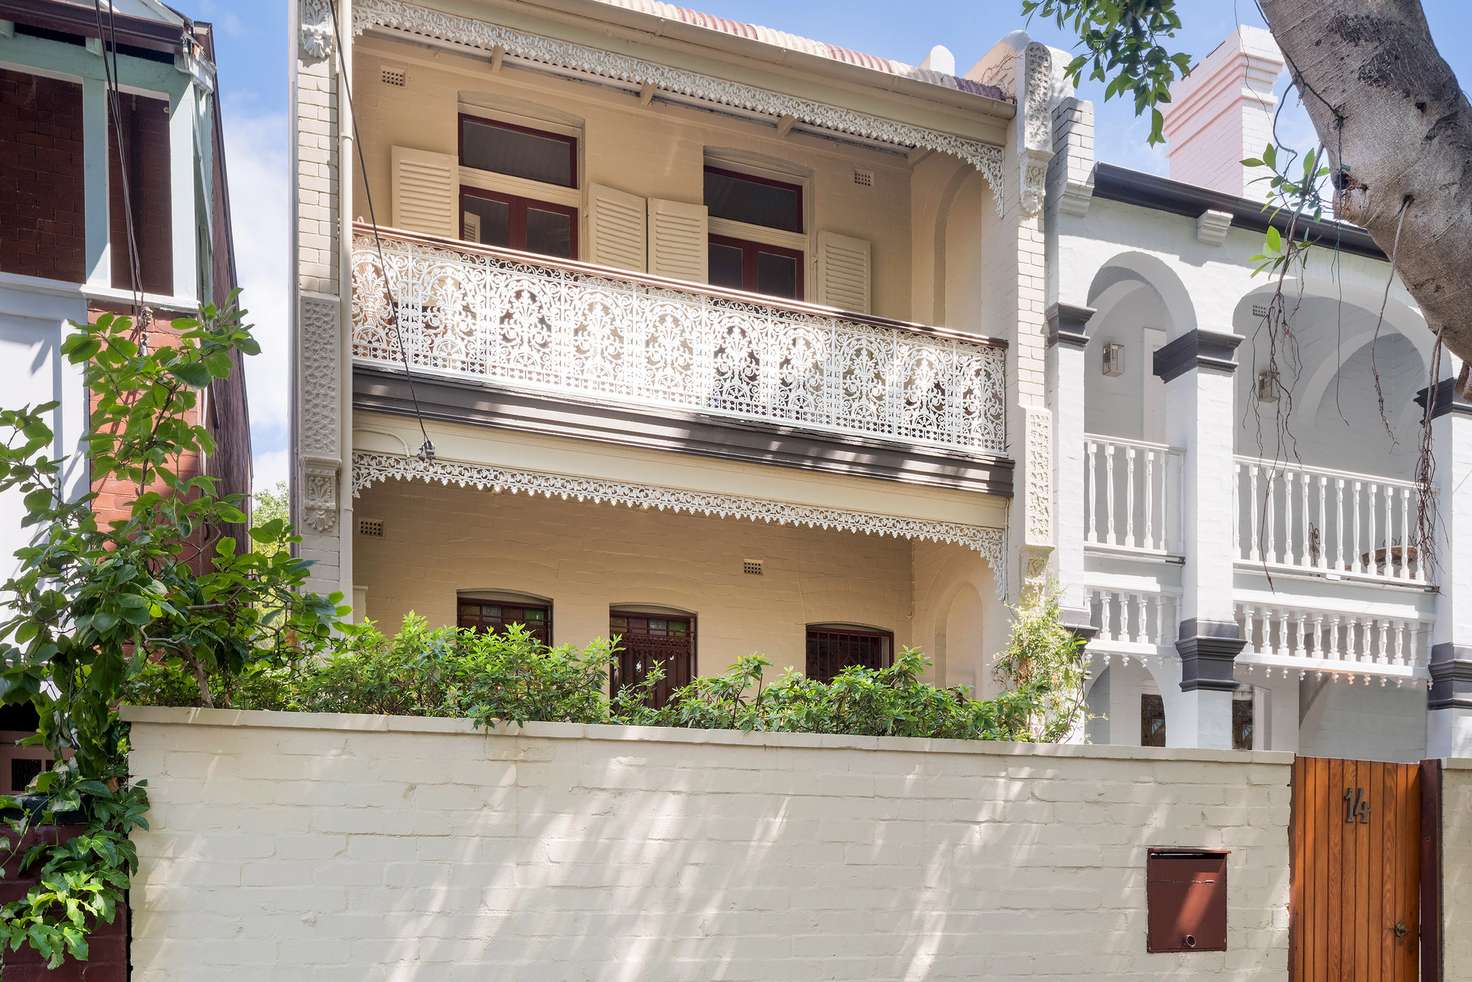 Main view of Homely house listing, 14 Llewellyn Street, Balmain NSW 2041